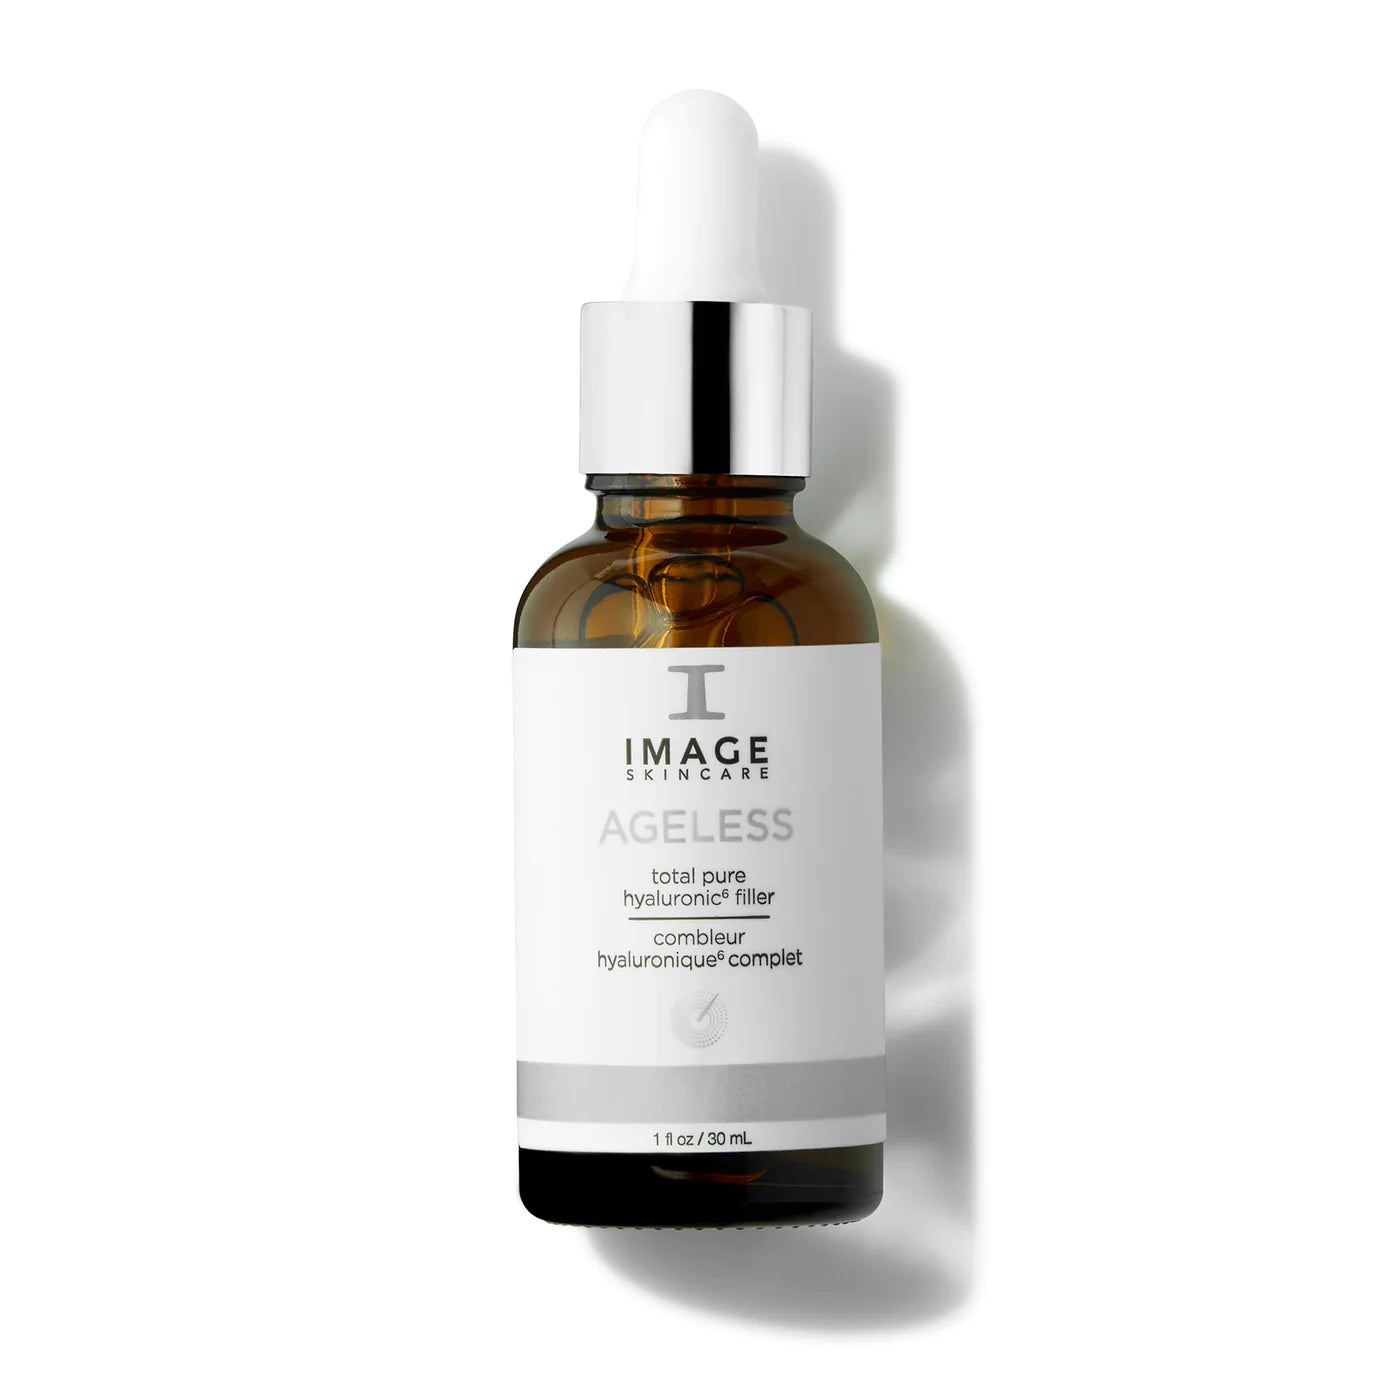 IMAGE SKINCARE AGELESS total pure hyaluronic 6 filler